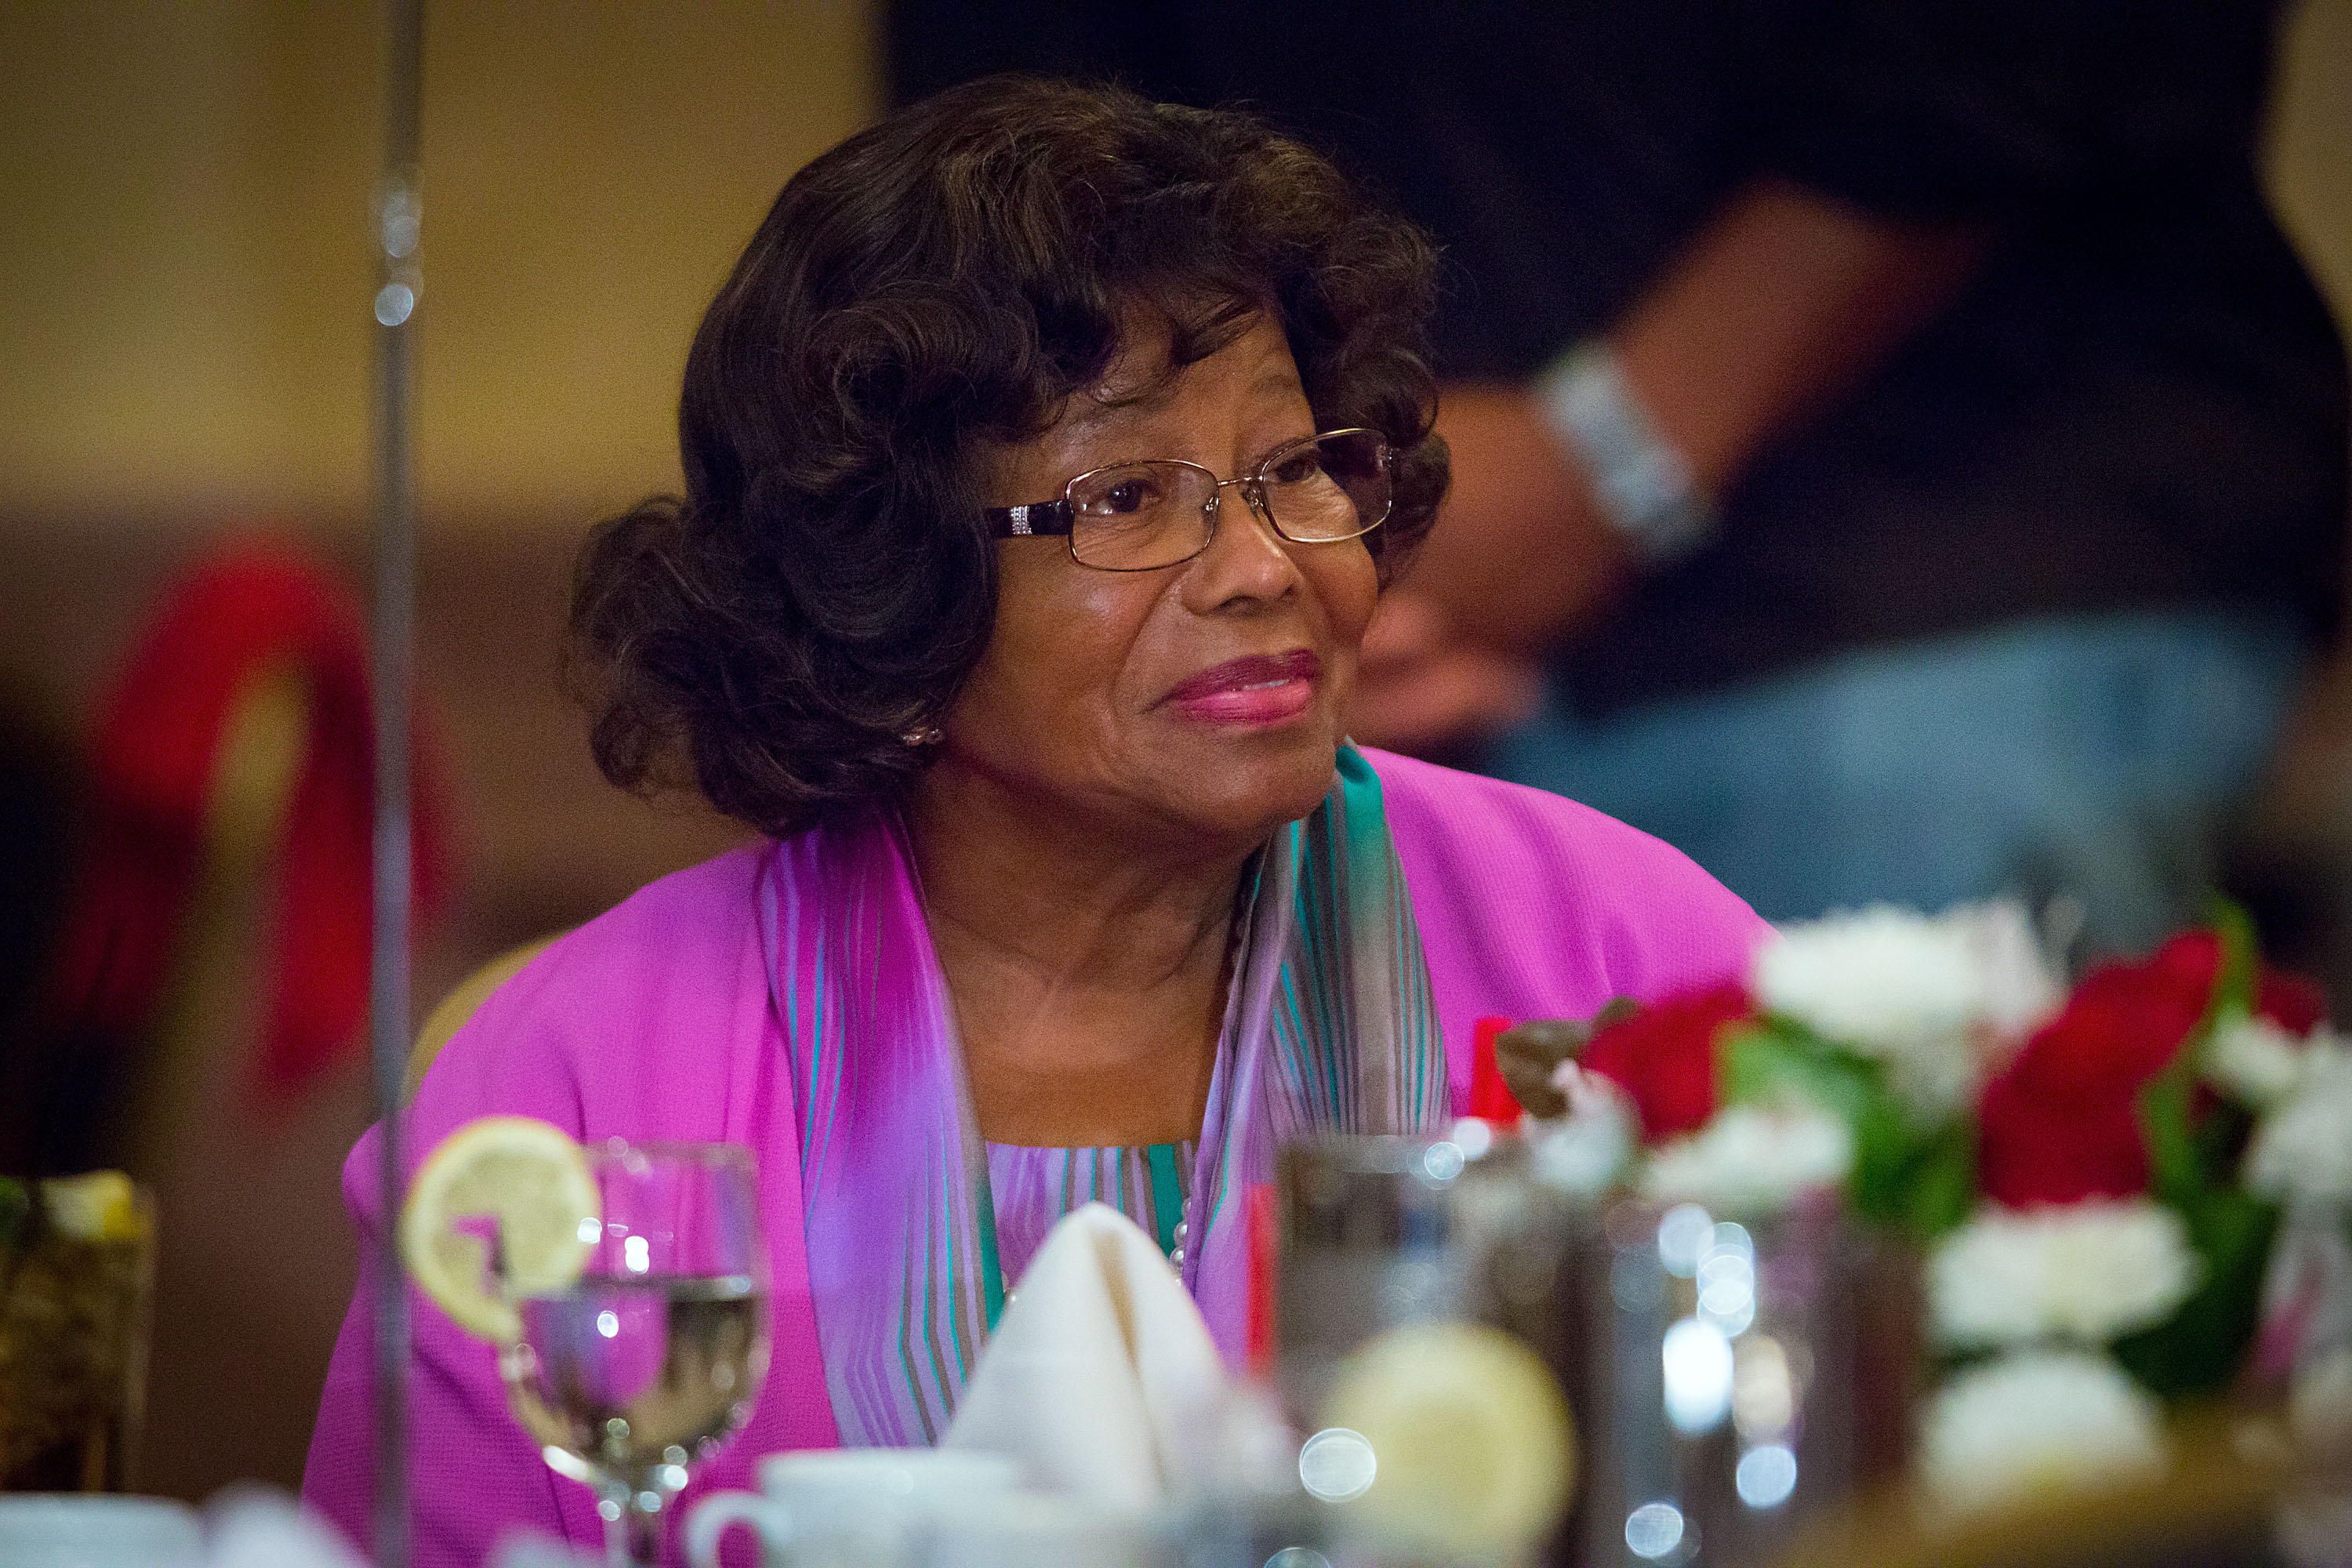 Katherine Jackson at "Goin' Back to Indiana: Can You Feel It" the Gary, Indiana Chamber of Commerce's event honoring Katherine Jackson on August 31, 2012, in Gary, Indiana